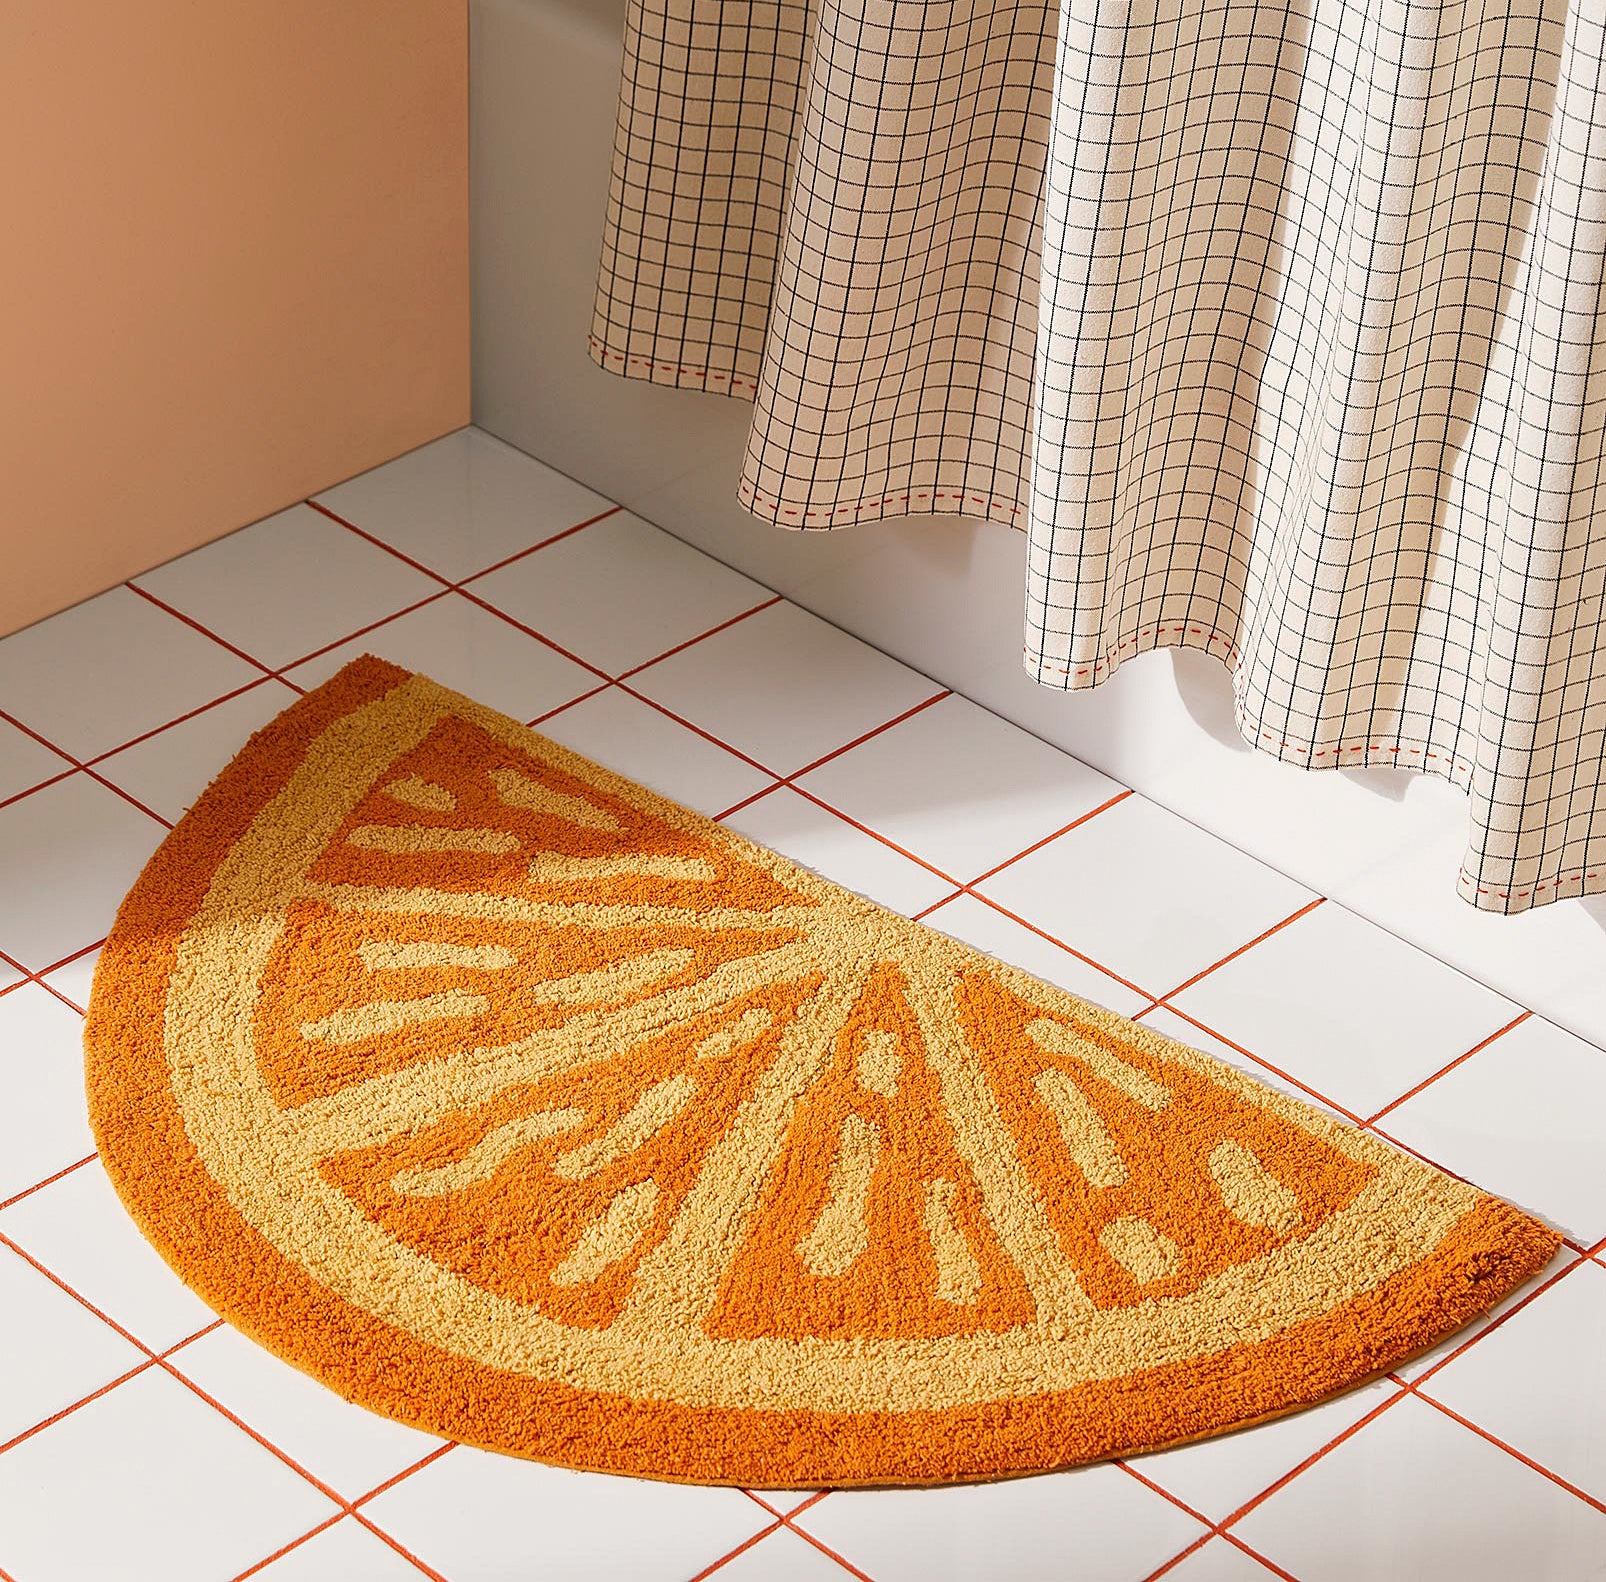 the bath mat on a bathroom floor in front of a shower